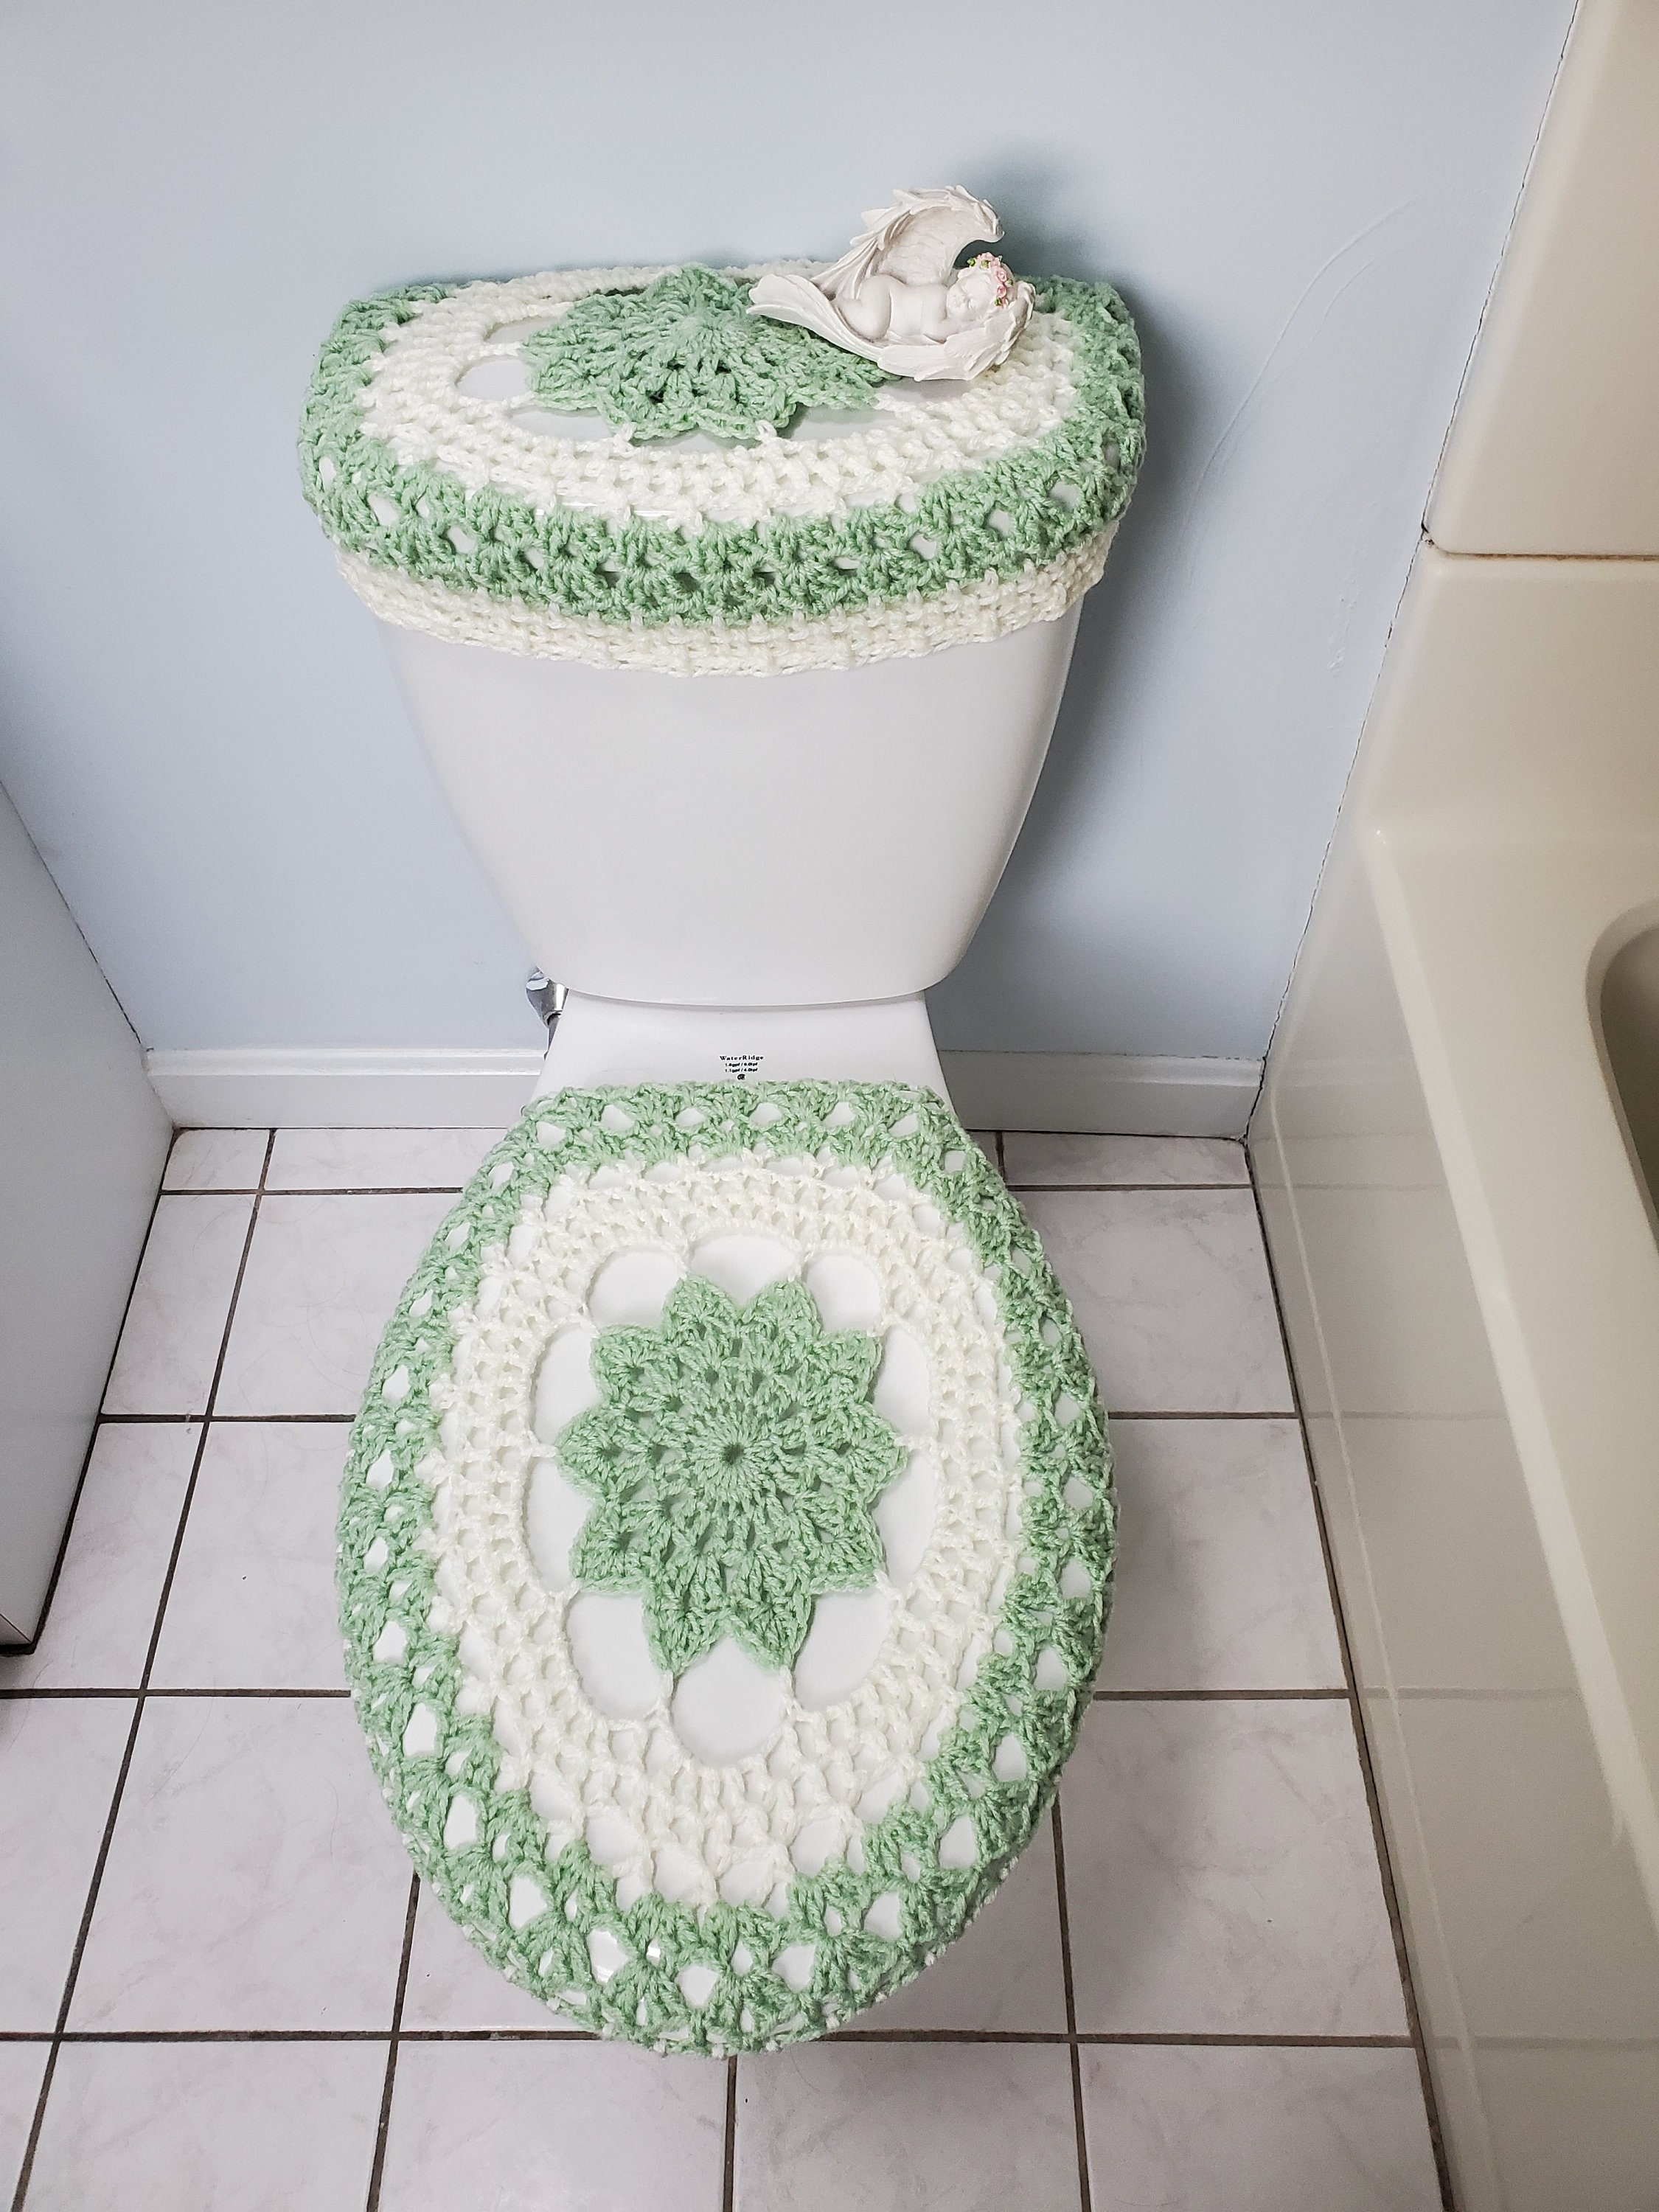 A set of 2 a crochet toilet seat cover and a tank lid cover honeydew/soft  white TTLTSC30P - .de